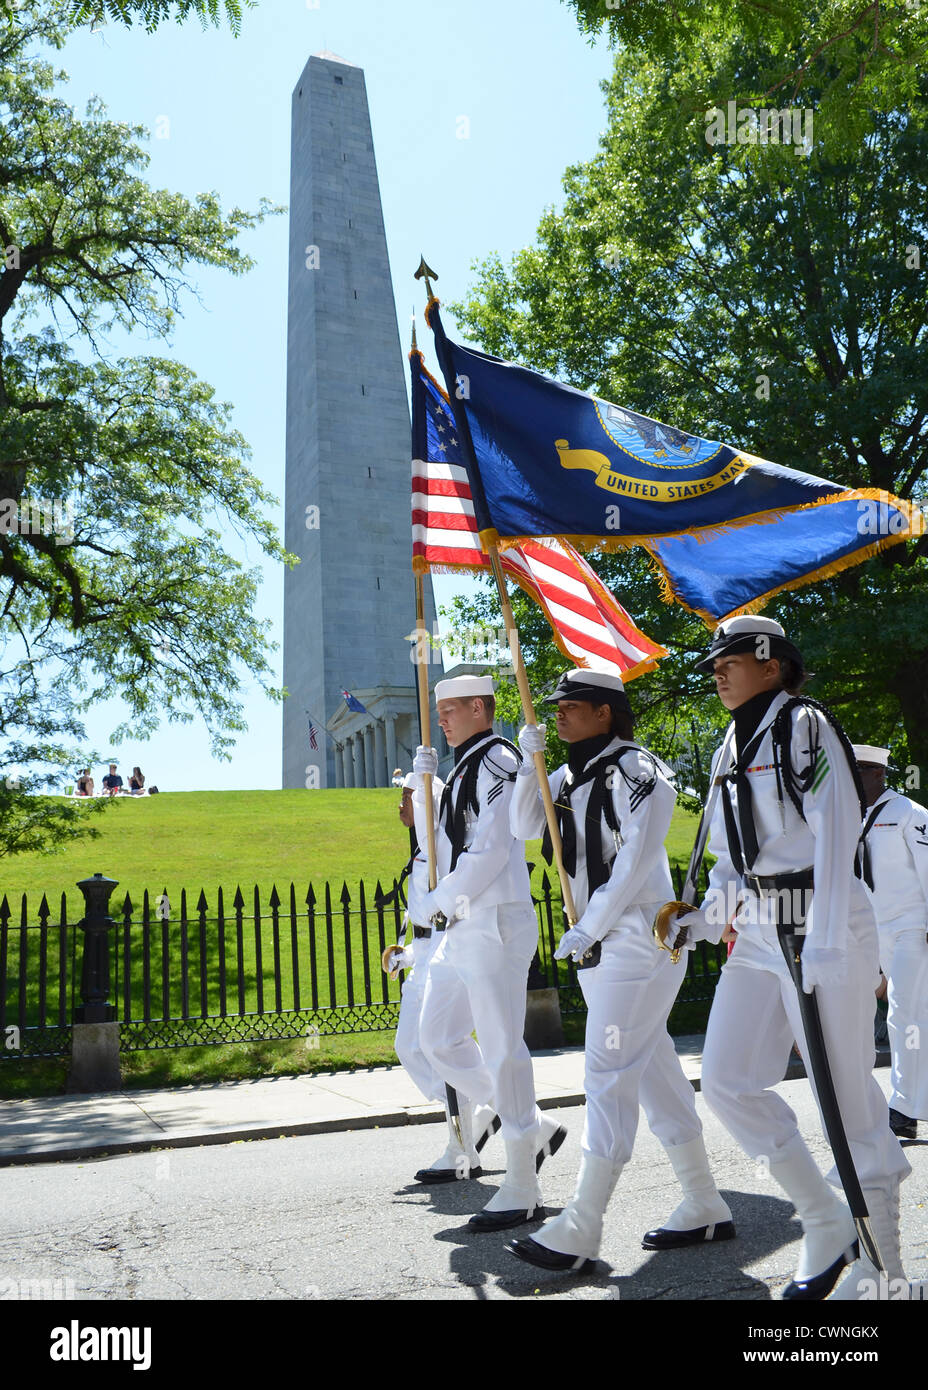 Sailors assigned to USS Constitution march in the annual Bunker Hill Day parade June 10, 2012 in Charlestown, Mass. Stock Photo